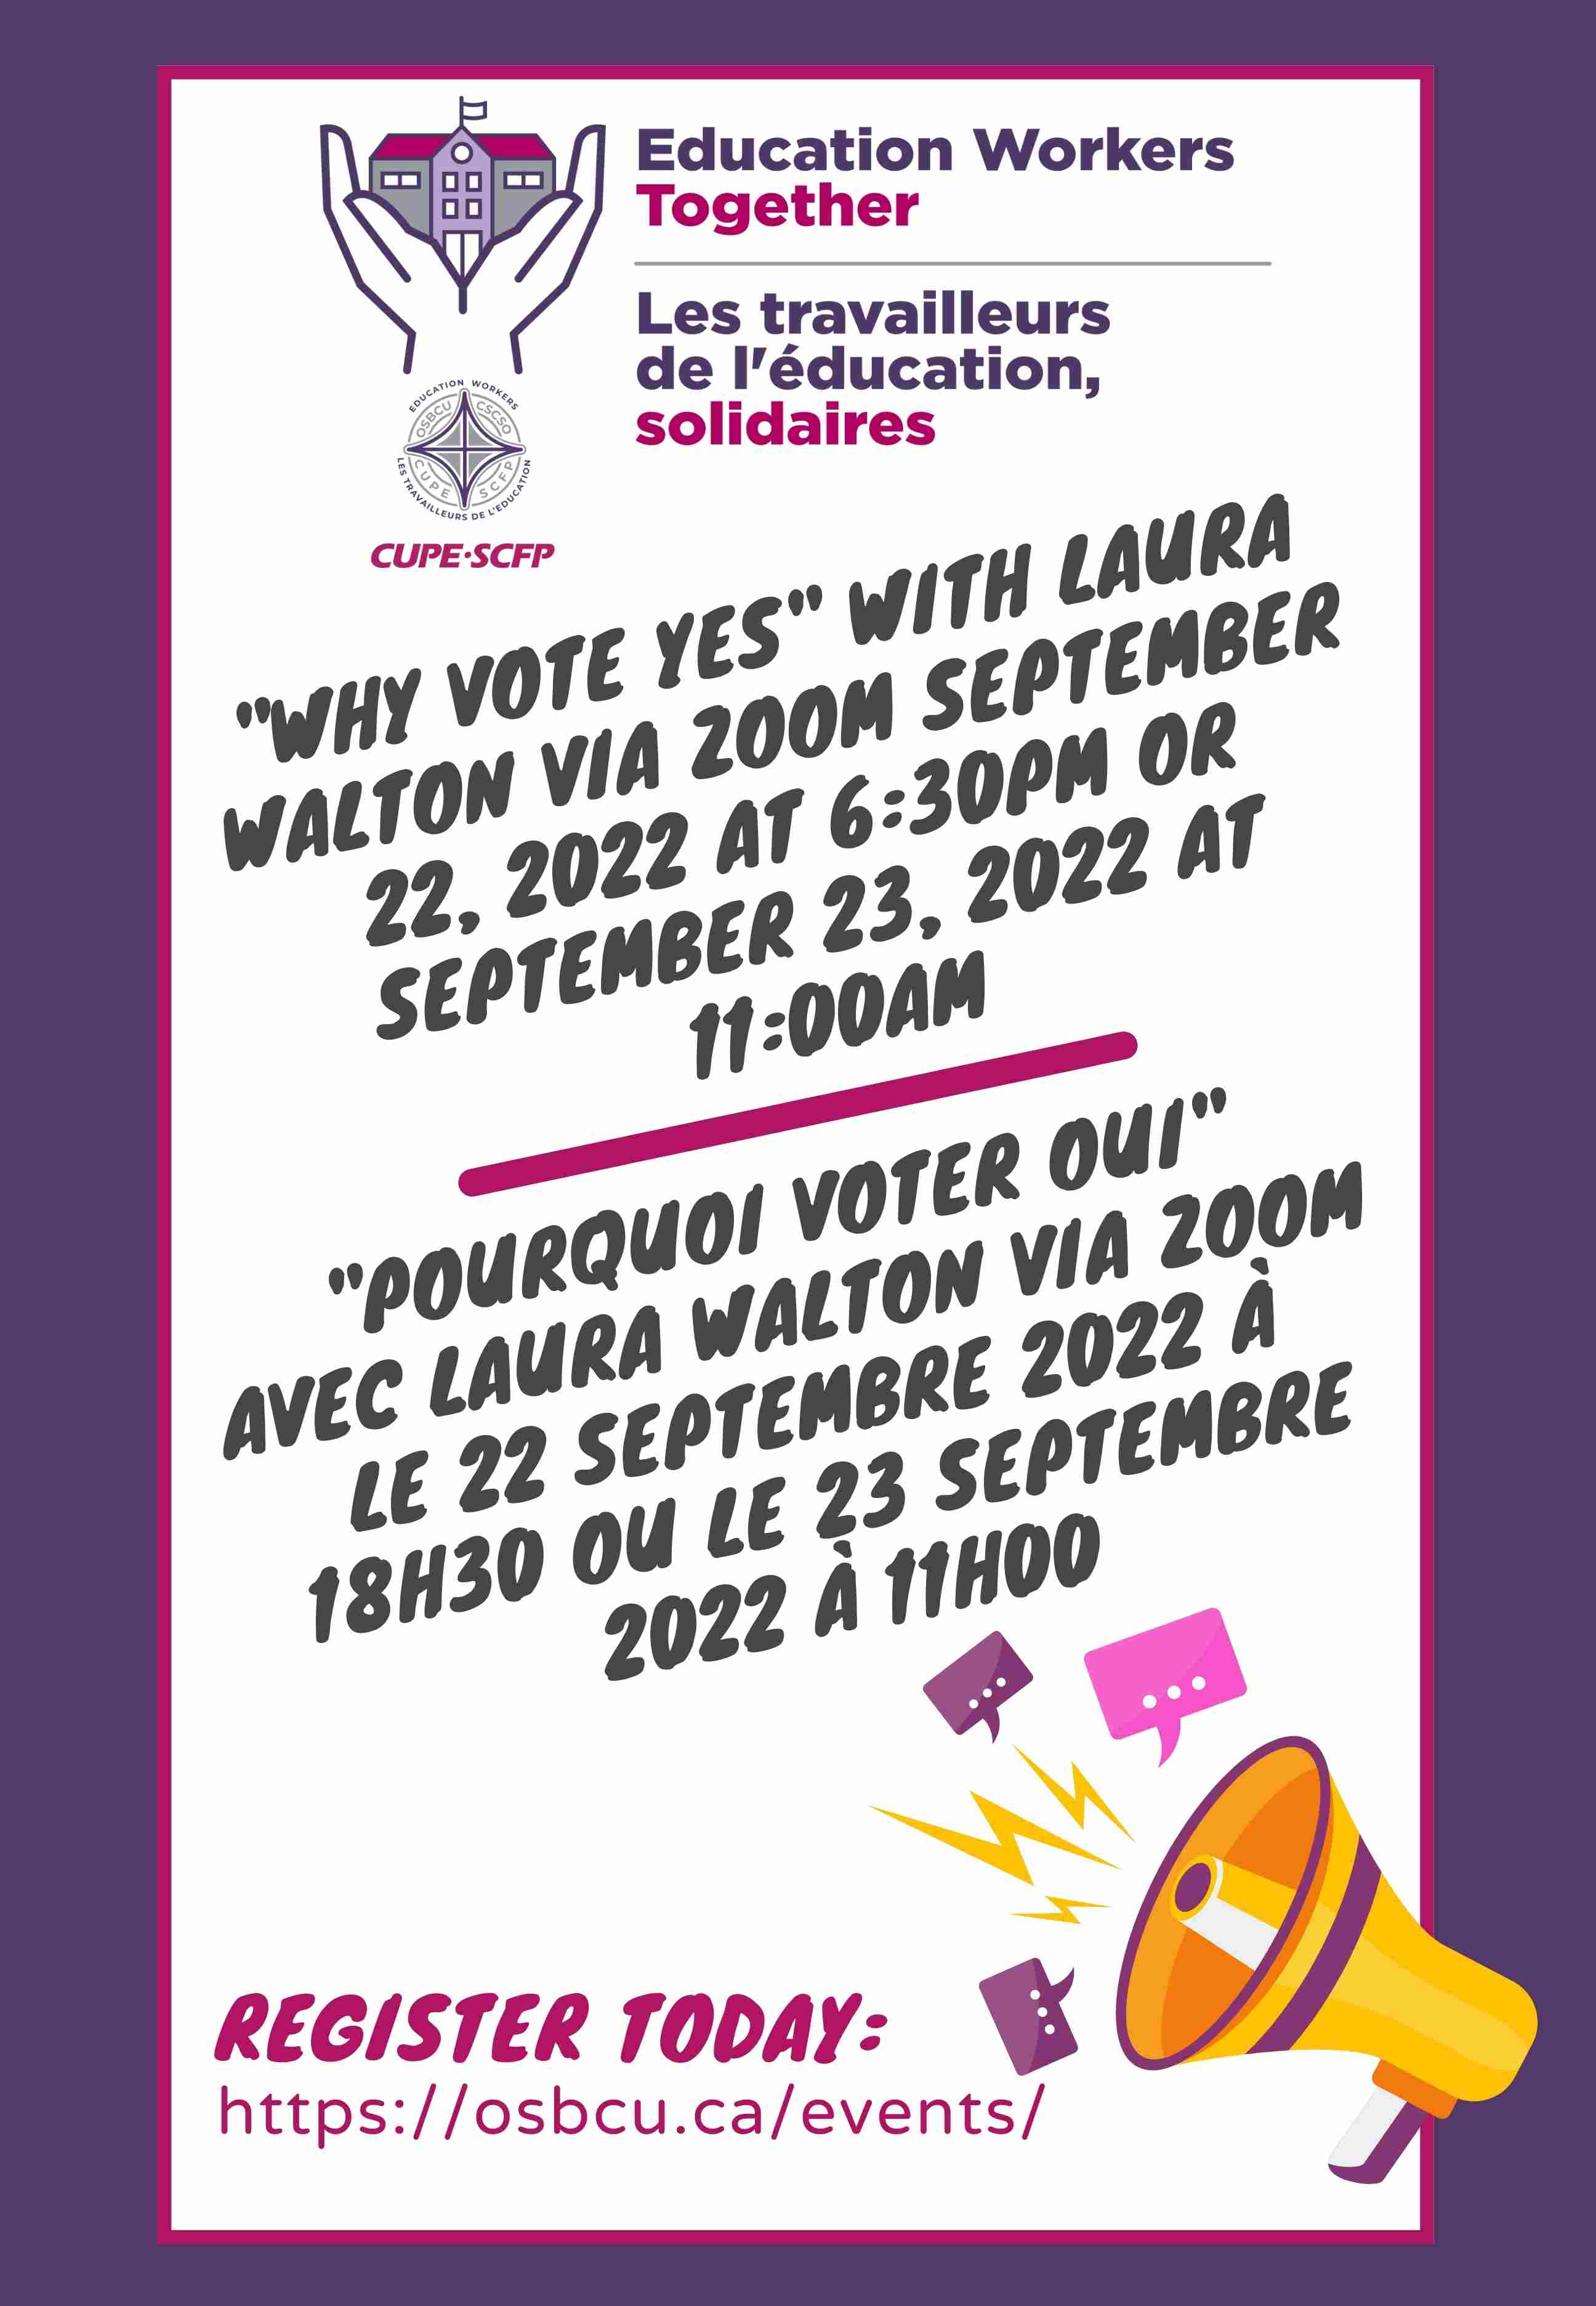 23 September 2022 "Why Vote Yes" with Laura Walton